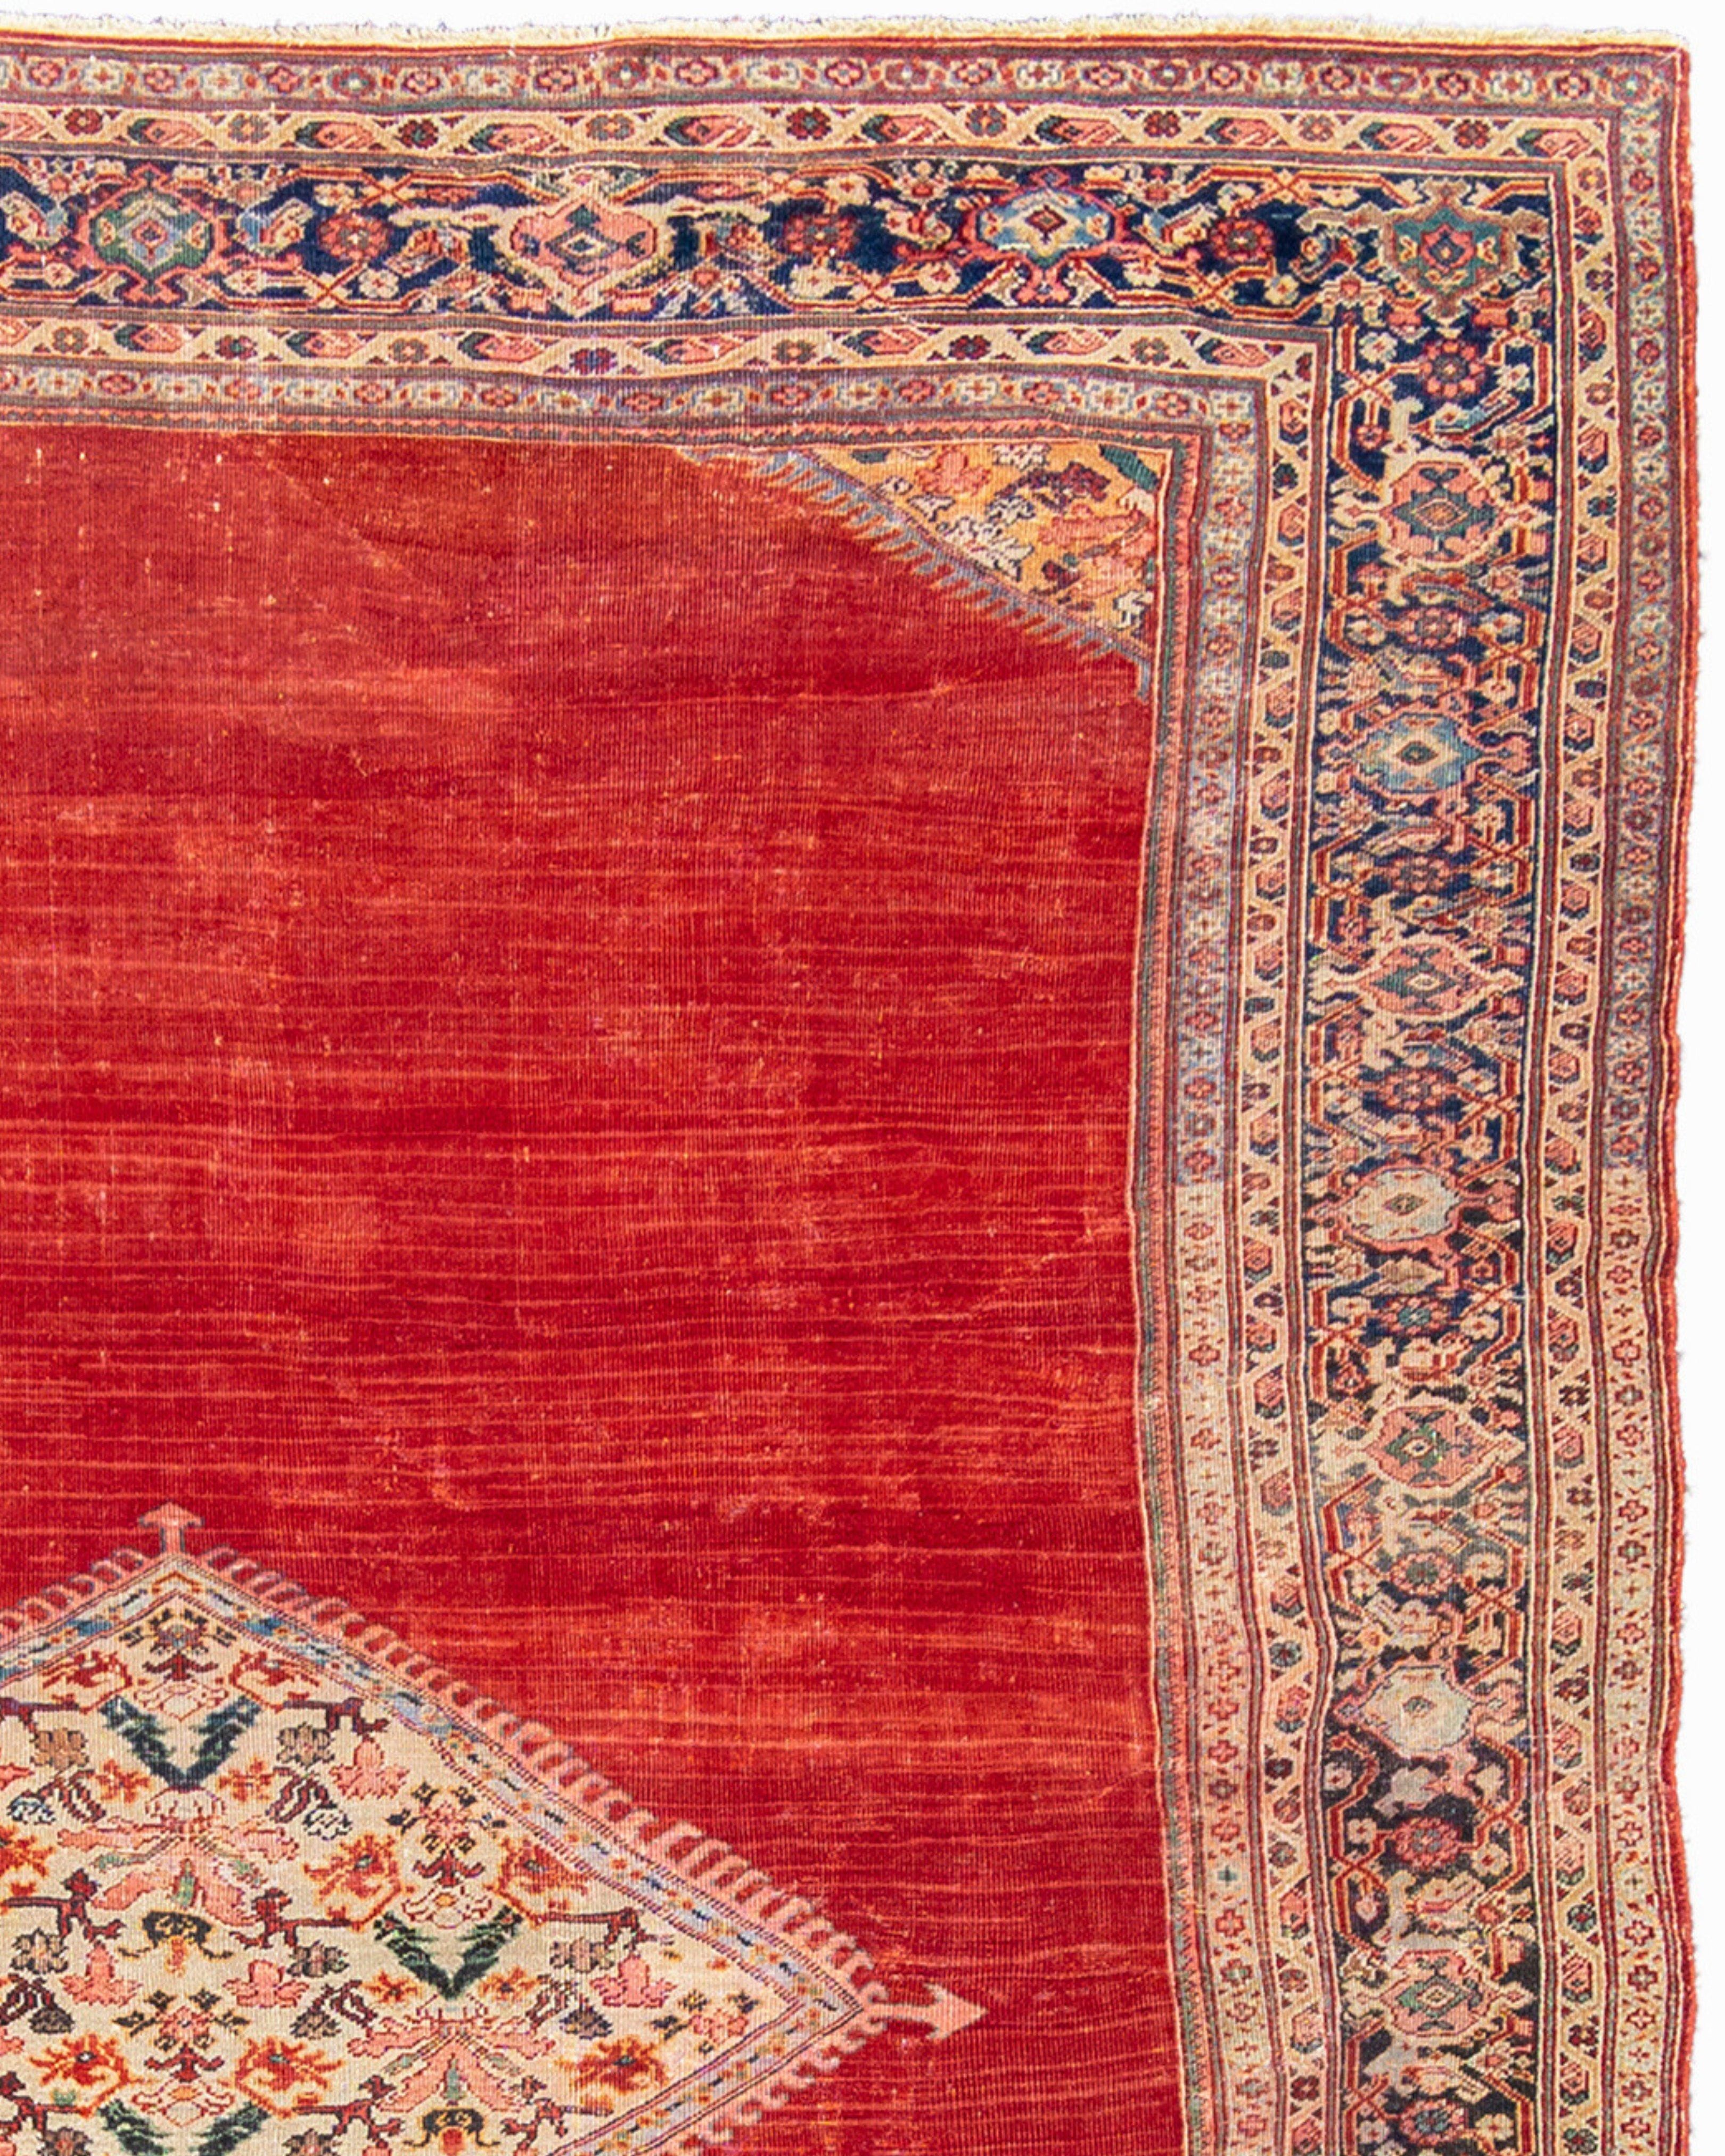 Ancien grand tapis rouge persan Mahal, c. 1900

Informations supplémentaires :
Dimensions : 9'2